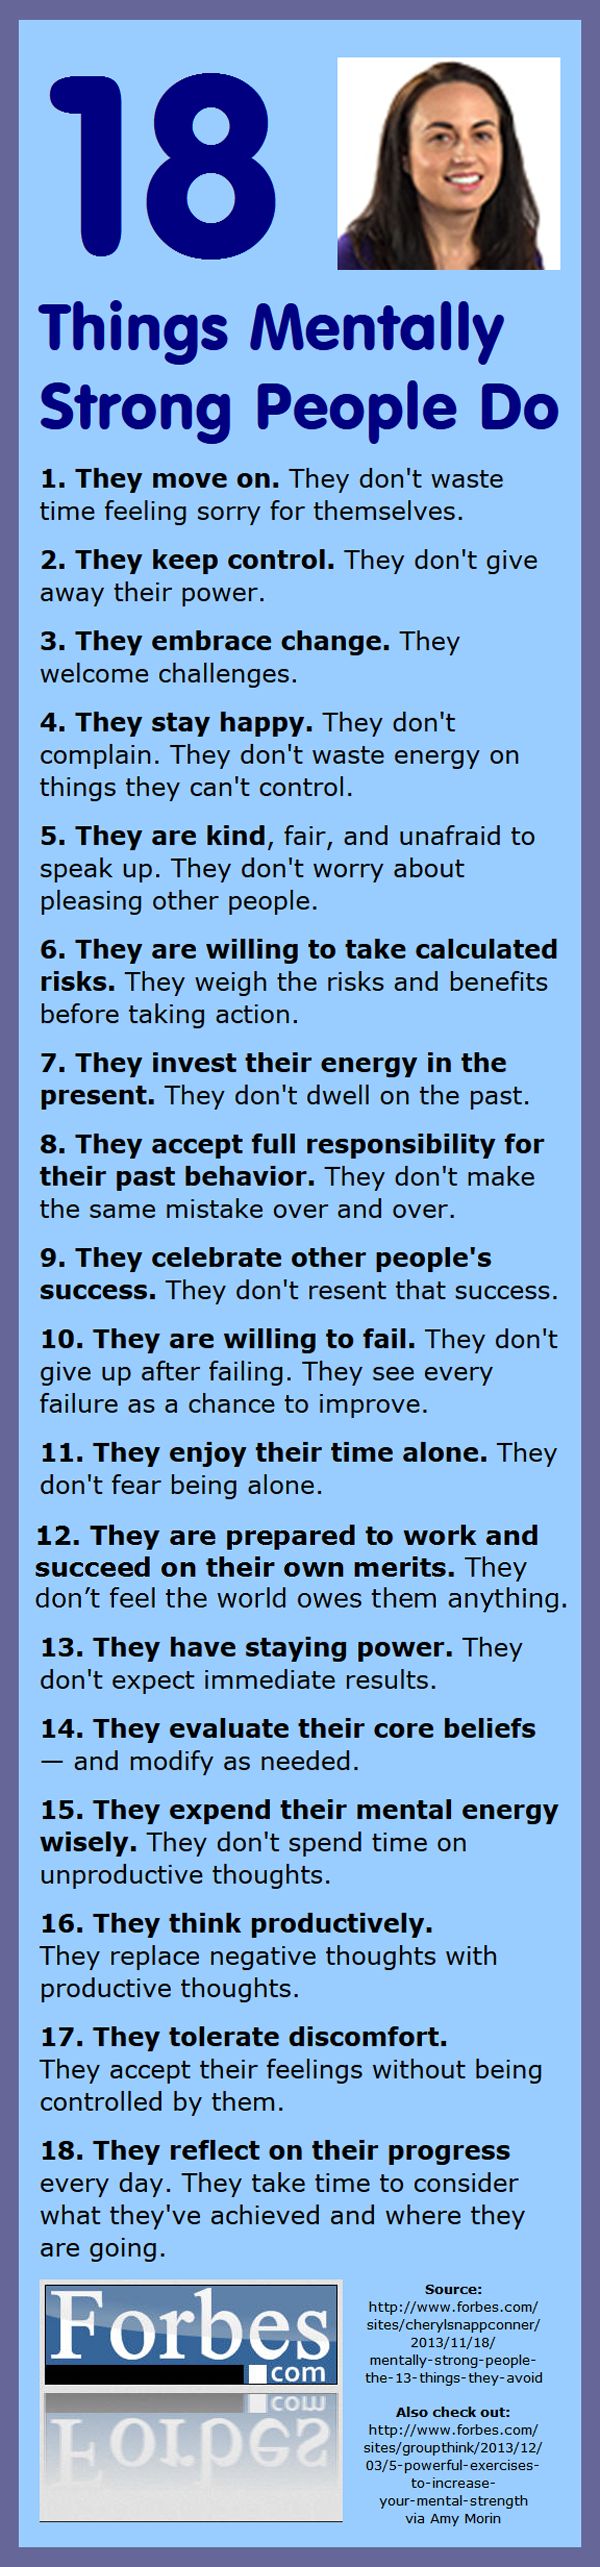 18-things-mentally-strong-people-do